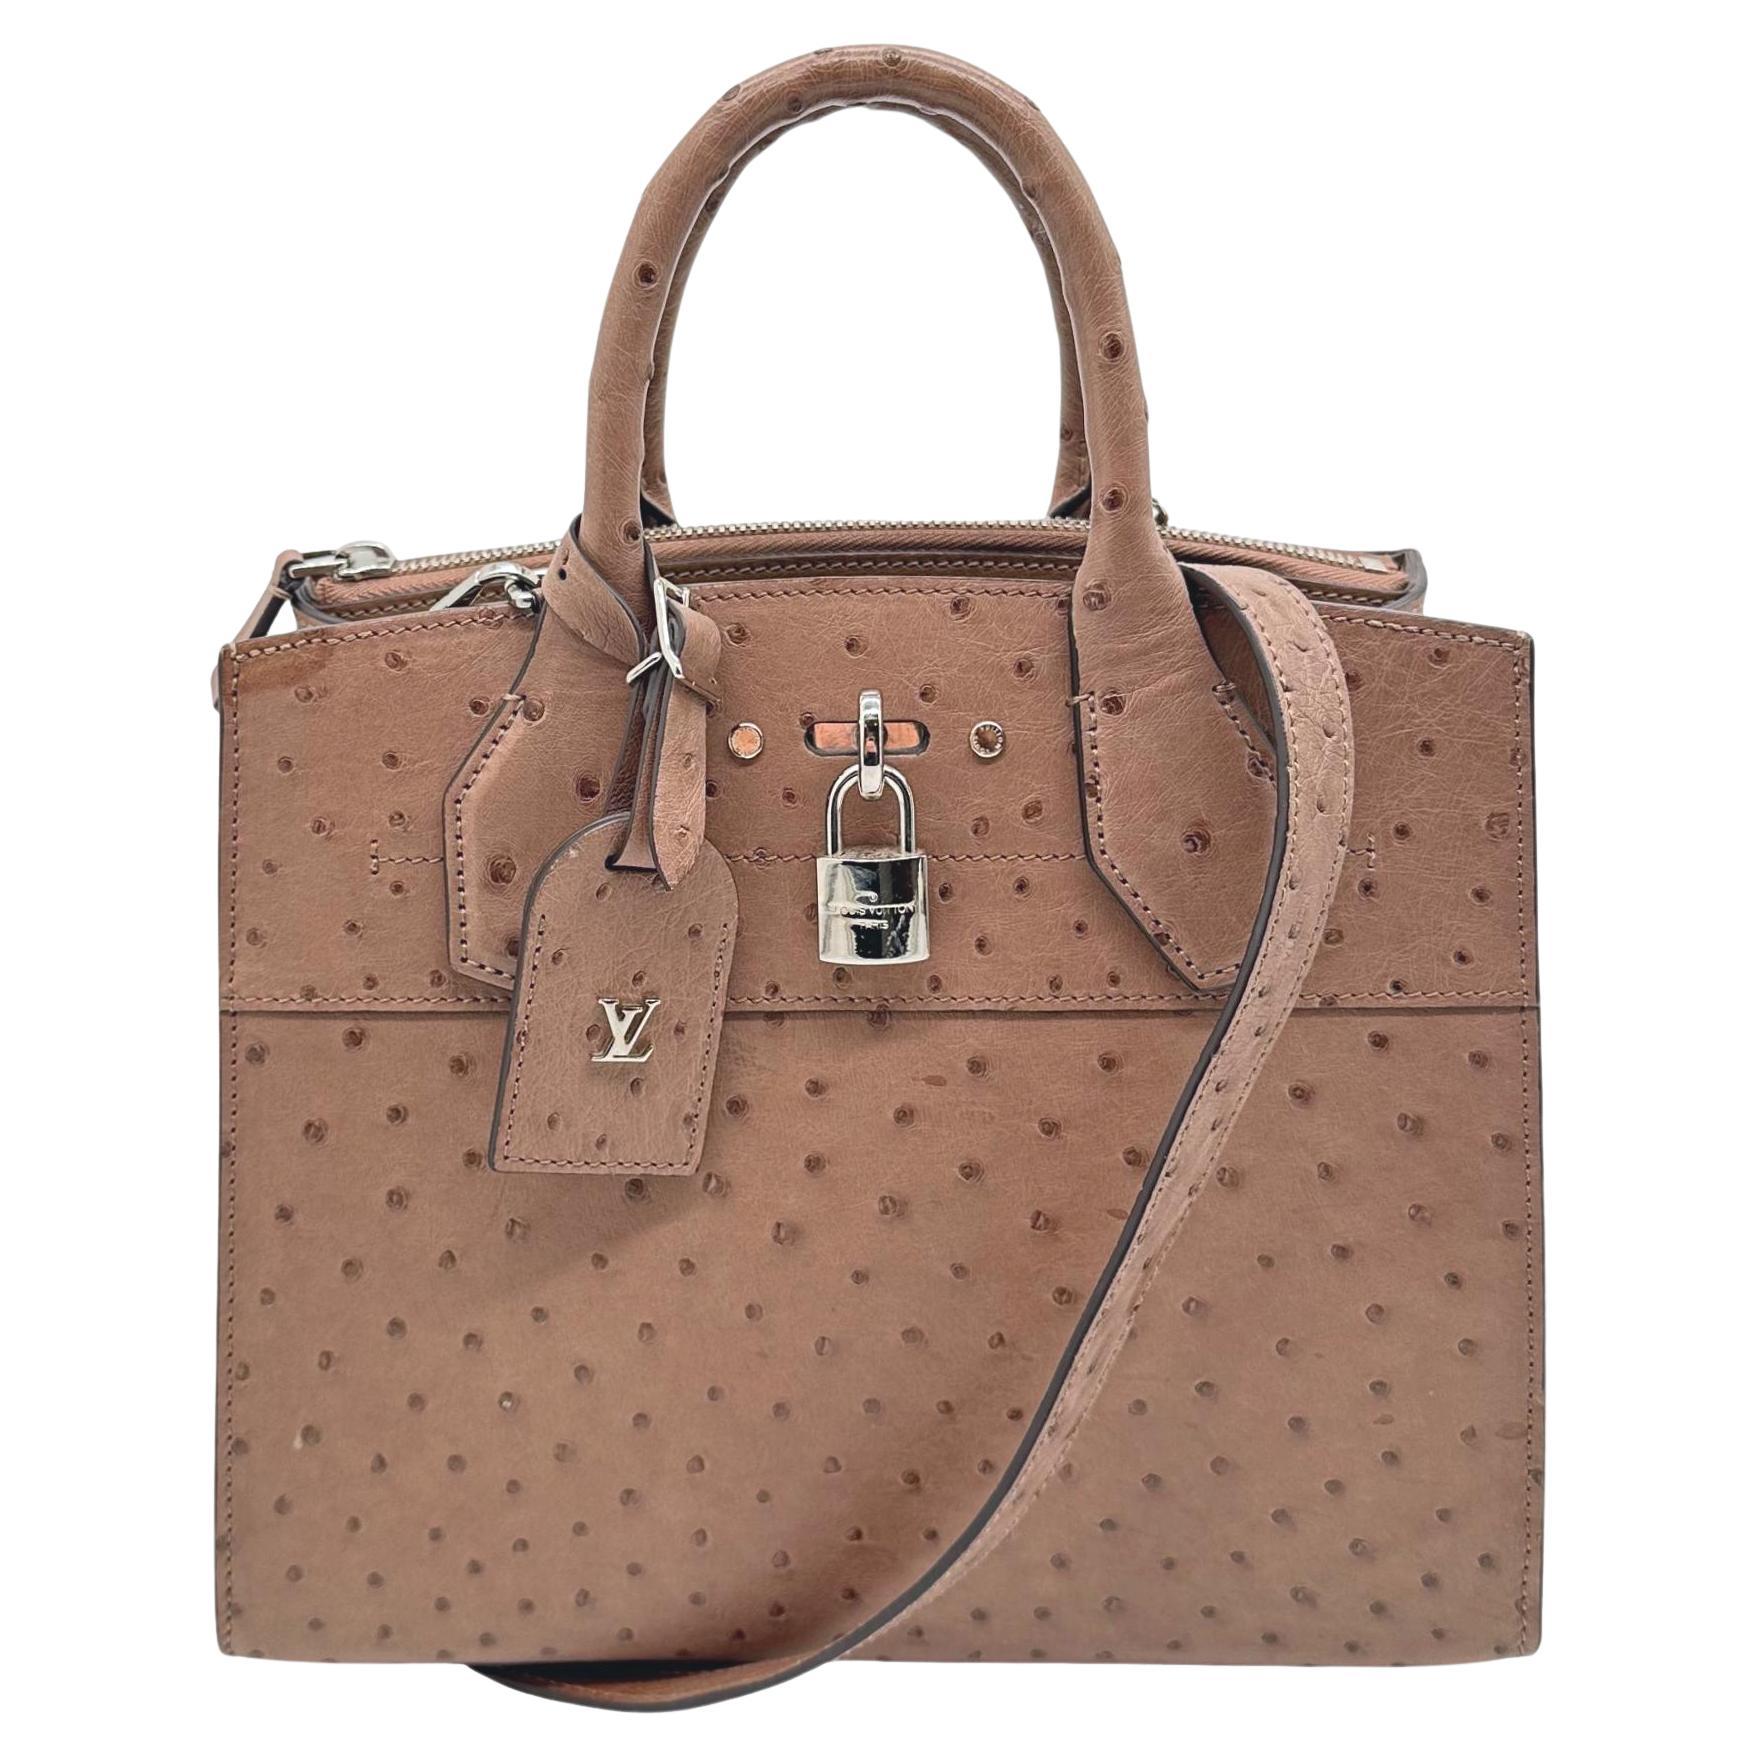 Louis Vuitton Limited Edition Gris Ostrich City Steamer PM Top Handle Bag, 2021. This steamer bag is a classic Louis Vuitton closet staple which was first introduced and designed by Nicolas Ghesquière for cruise-ship passengers in 1901. Since its